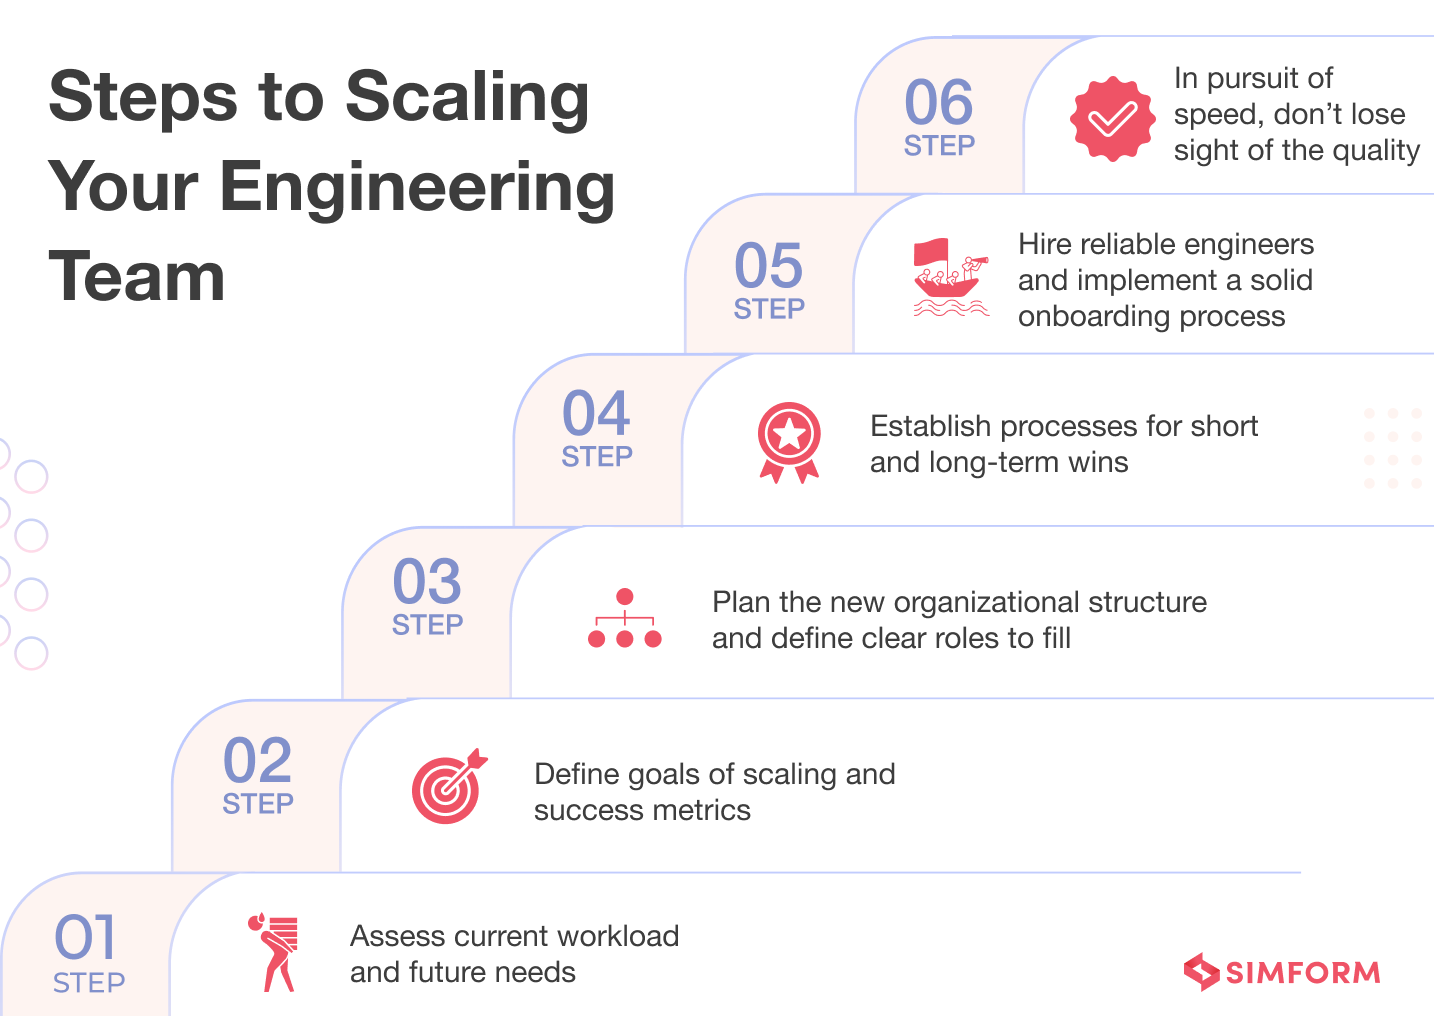 Steps to Scaling Your Engineering Team